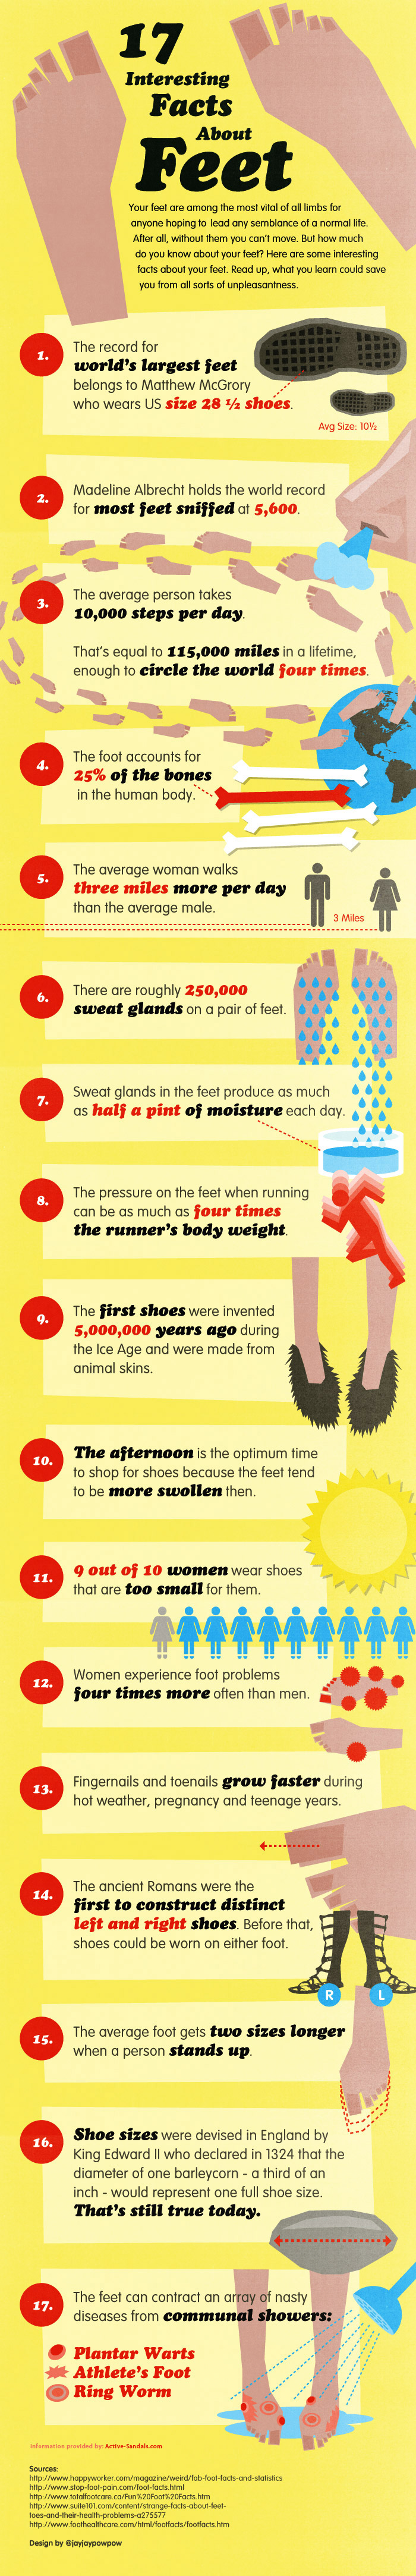 17 Interesting Facts About Feet Infographic